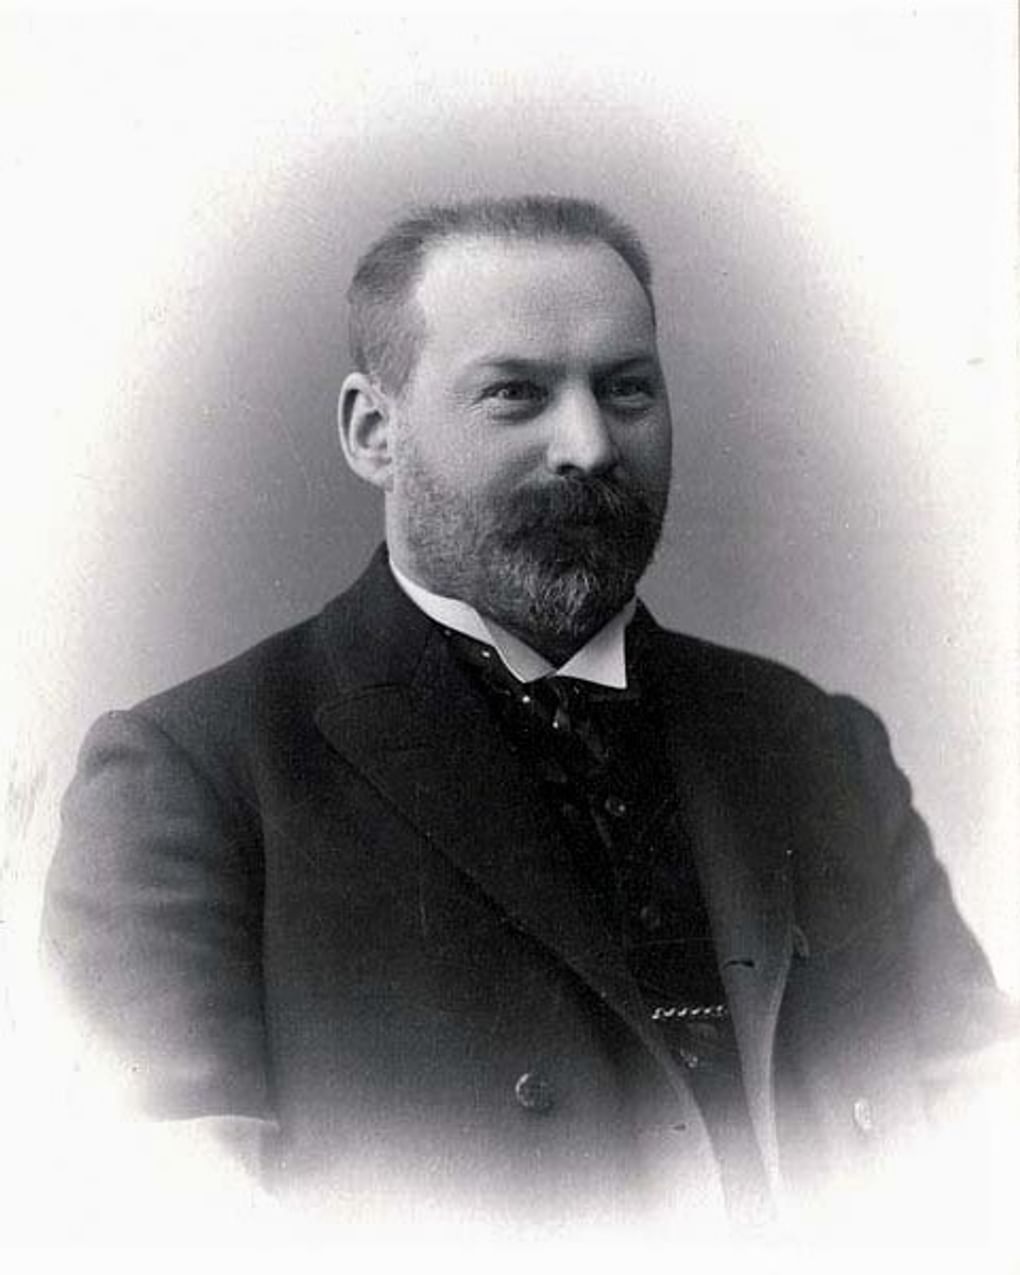 Лев Кекушев. 1907. Фотография: <a href="https://commons.wikimedia.org/w/index.php?curid=35015720" target="_blank" rel="noopener">commons.wikimedia</a> / Public Domain